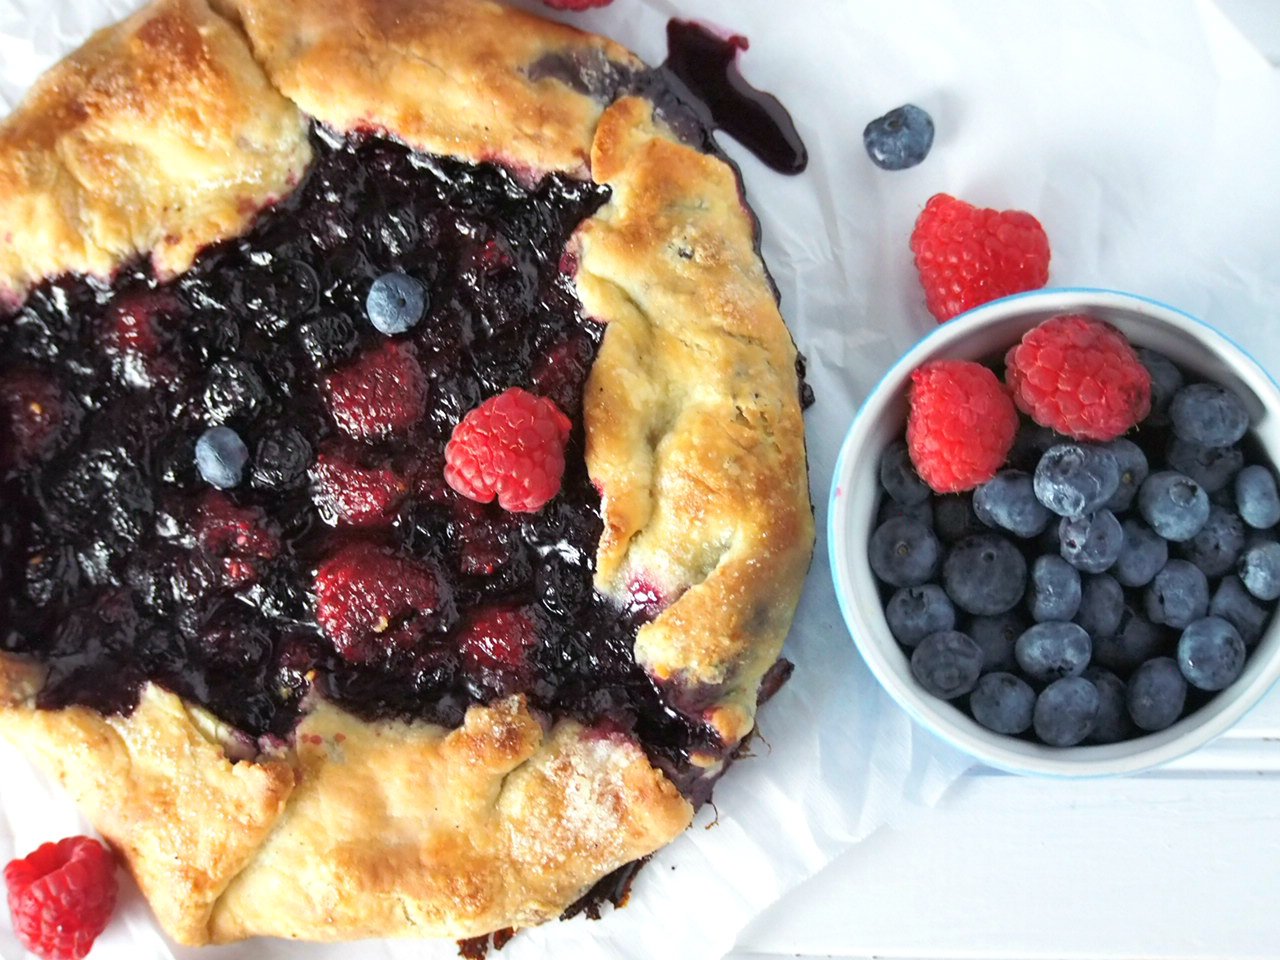 Juicy sweet berries are nestled in a crisp cornmeal crust in this simple mixed berries galette. Top this with vanilla ice cream and you are in for a sweet, lightly tart and crisp pastry treat!